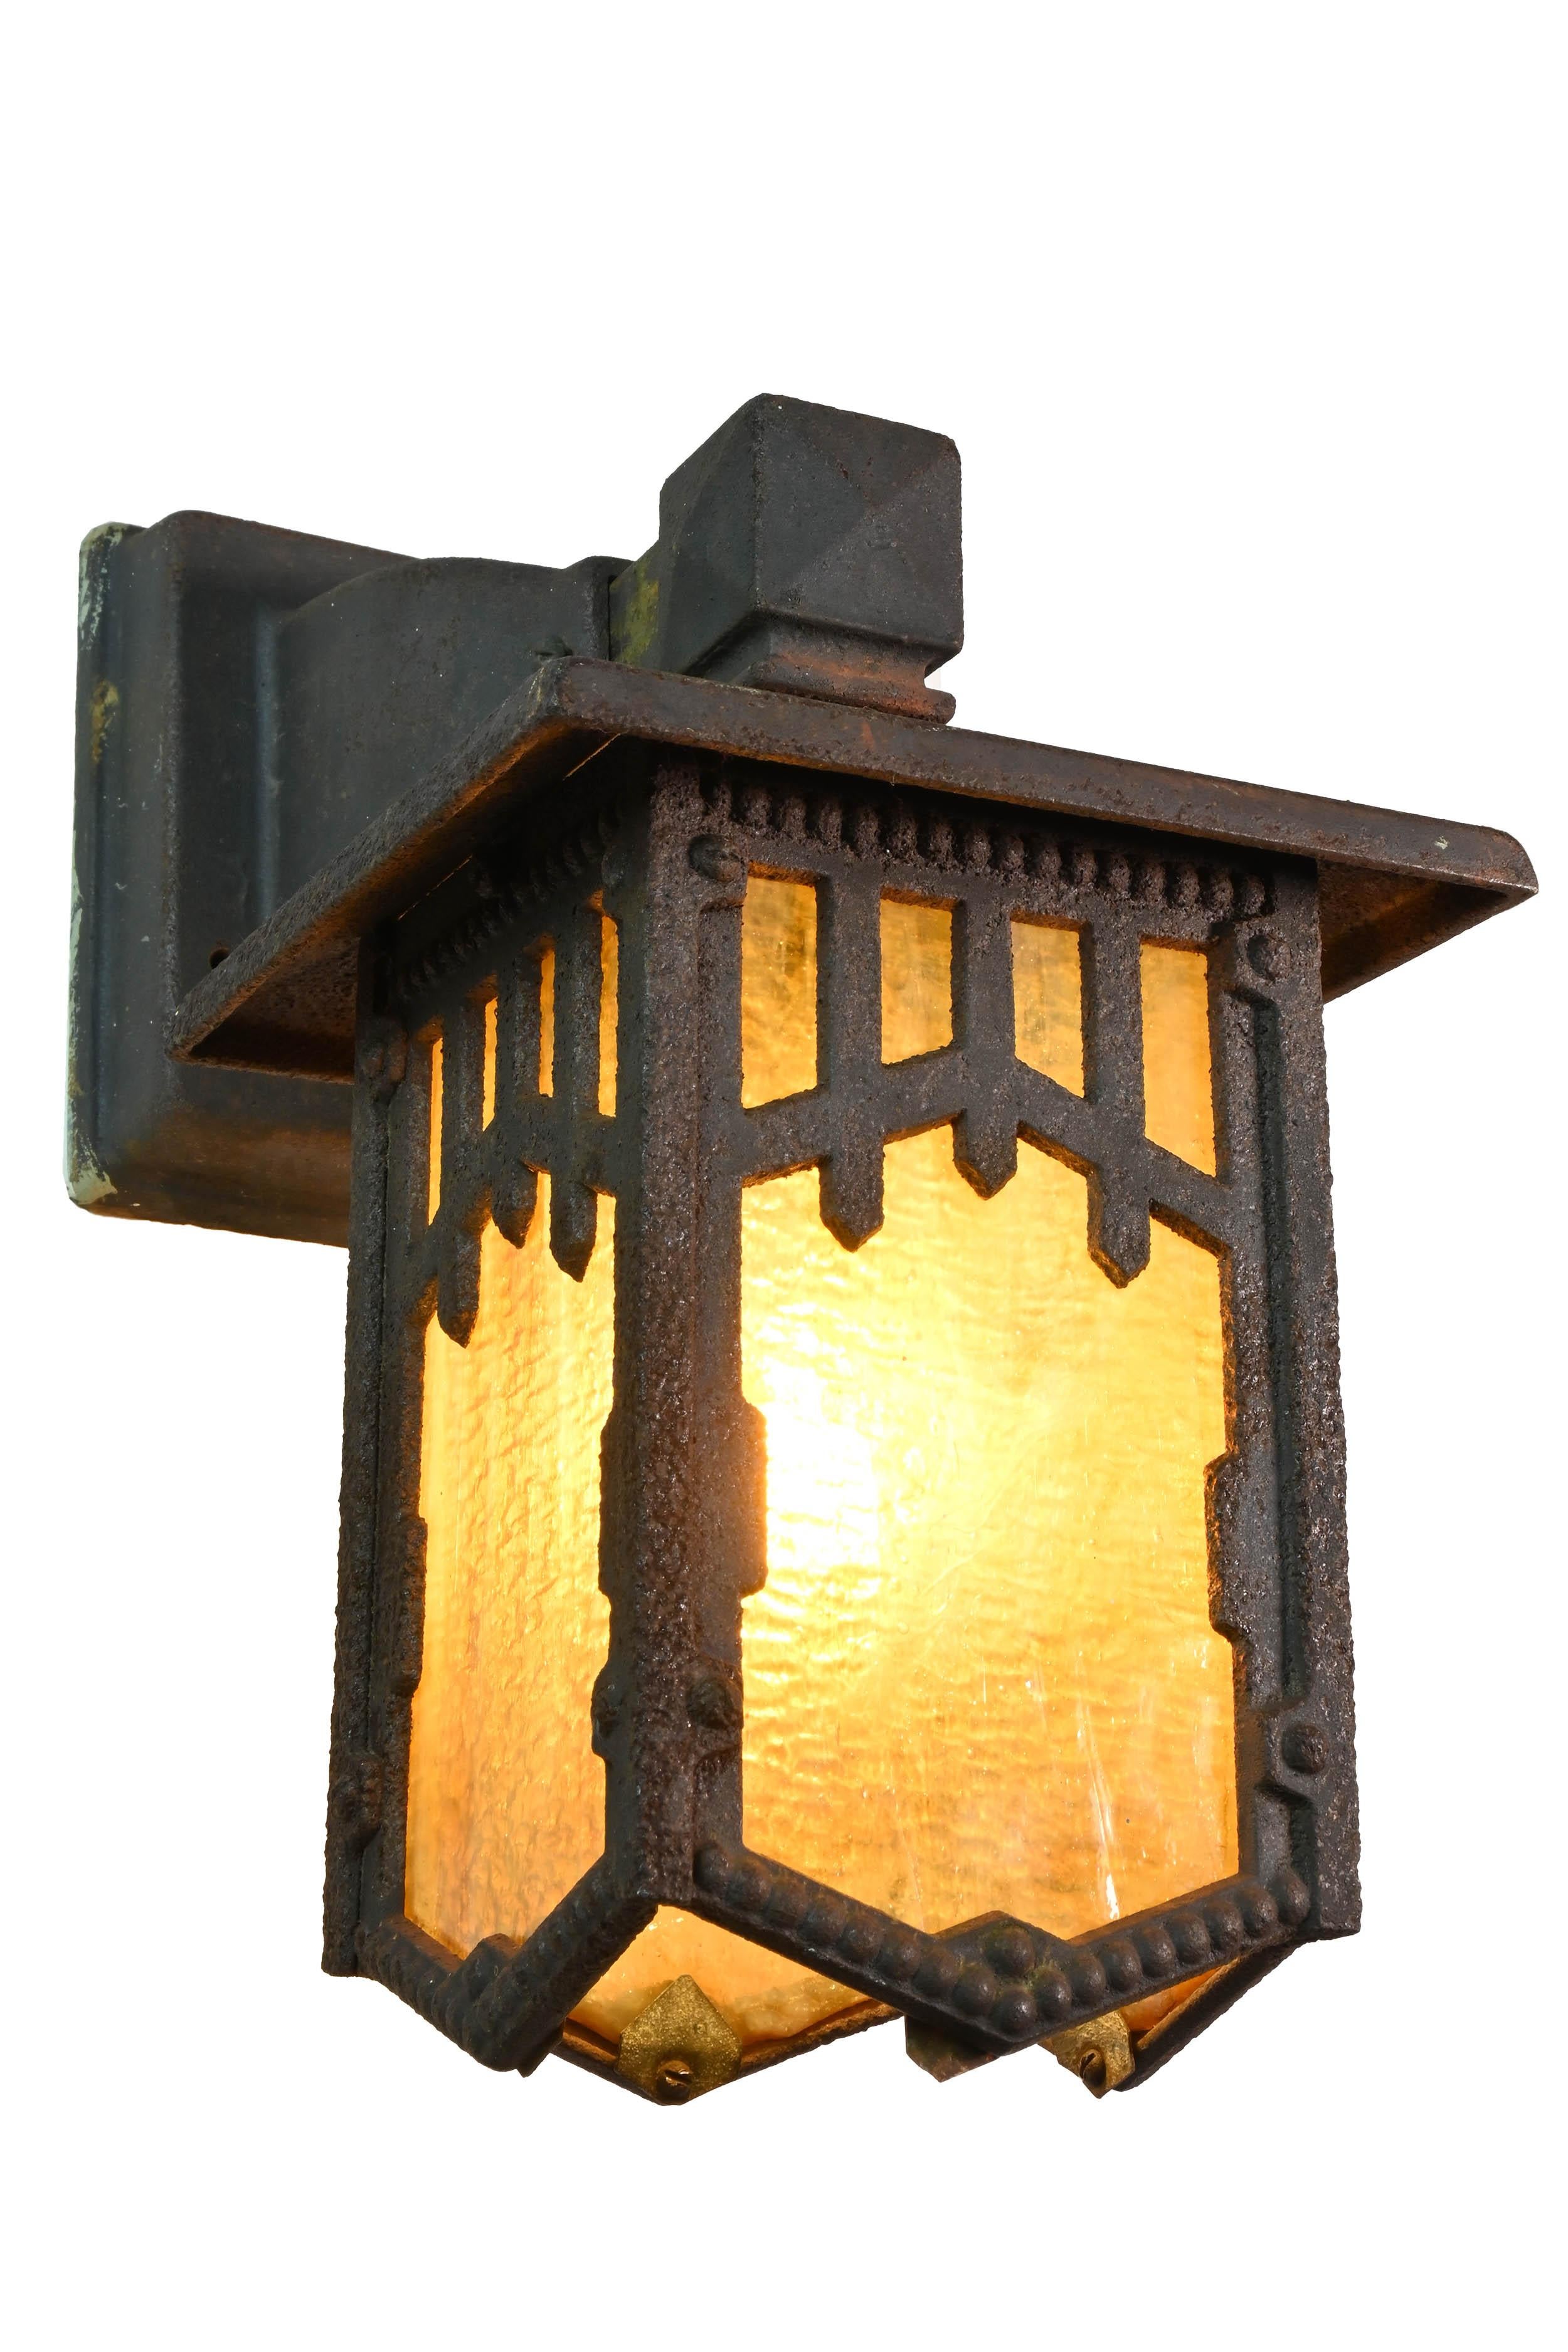 Cast iron sconce pair with original patina finish and original iridescent caramel slag glass. Simple sconce design Arts & Crafts decorative ornamentation. This sconce pair lighting fixtures Perfect for a front porch or inside in the entry of any